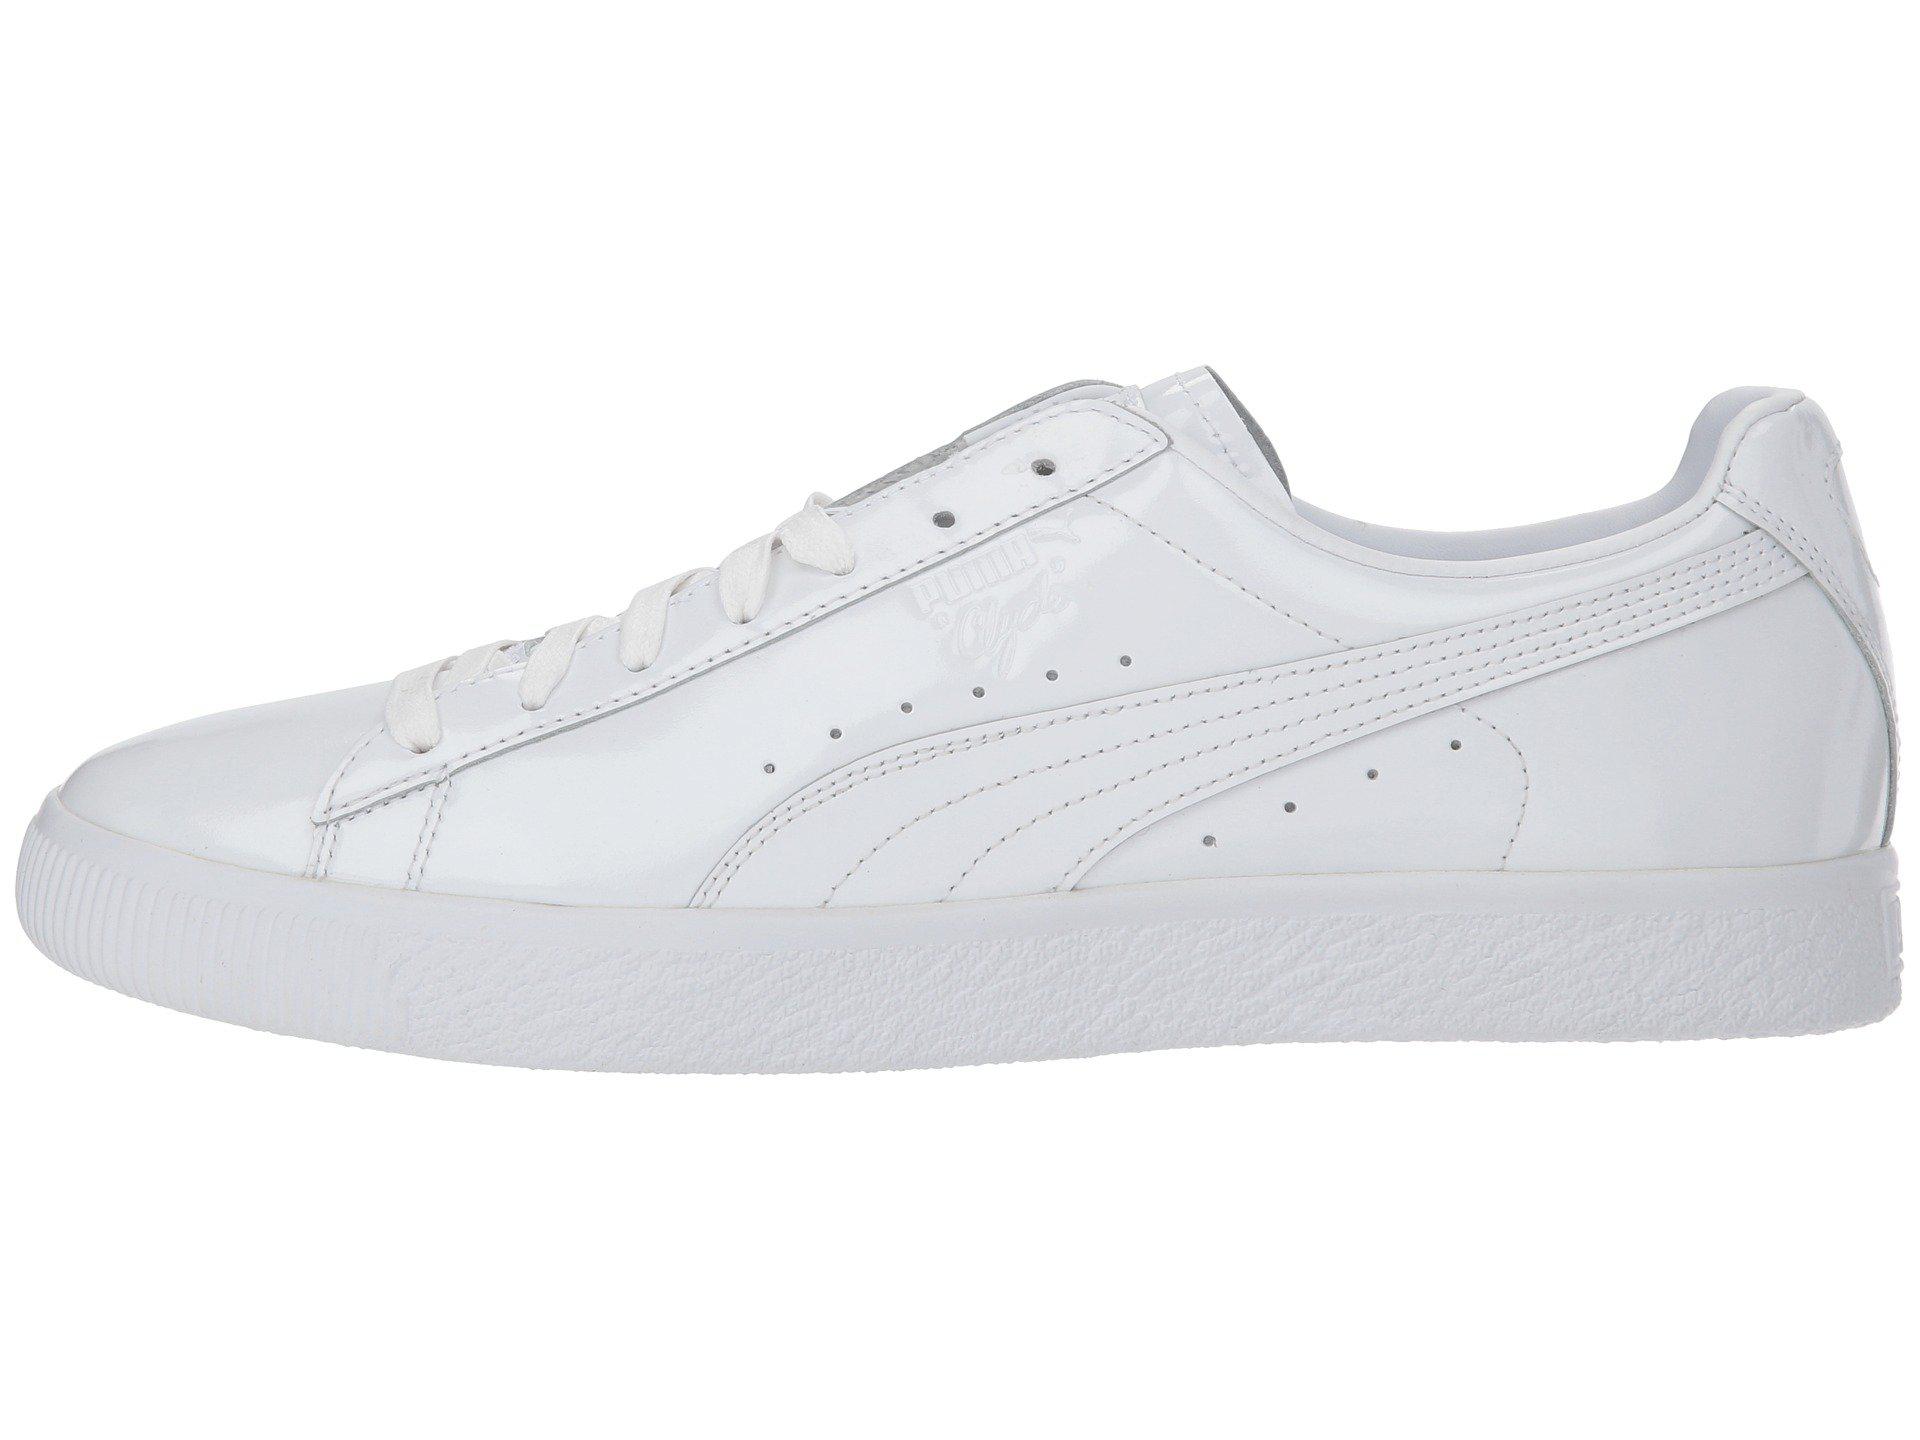 PUMA Leather Clyde Dressed Part Three ( White) Men's Lace Up Casual Shoes  for Men - Lyst